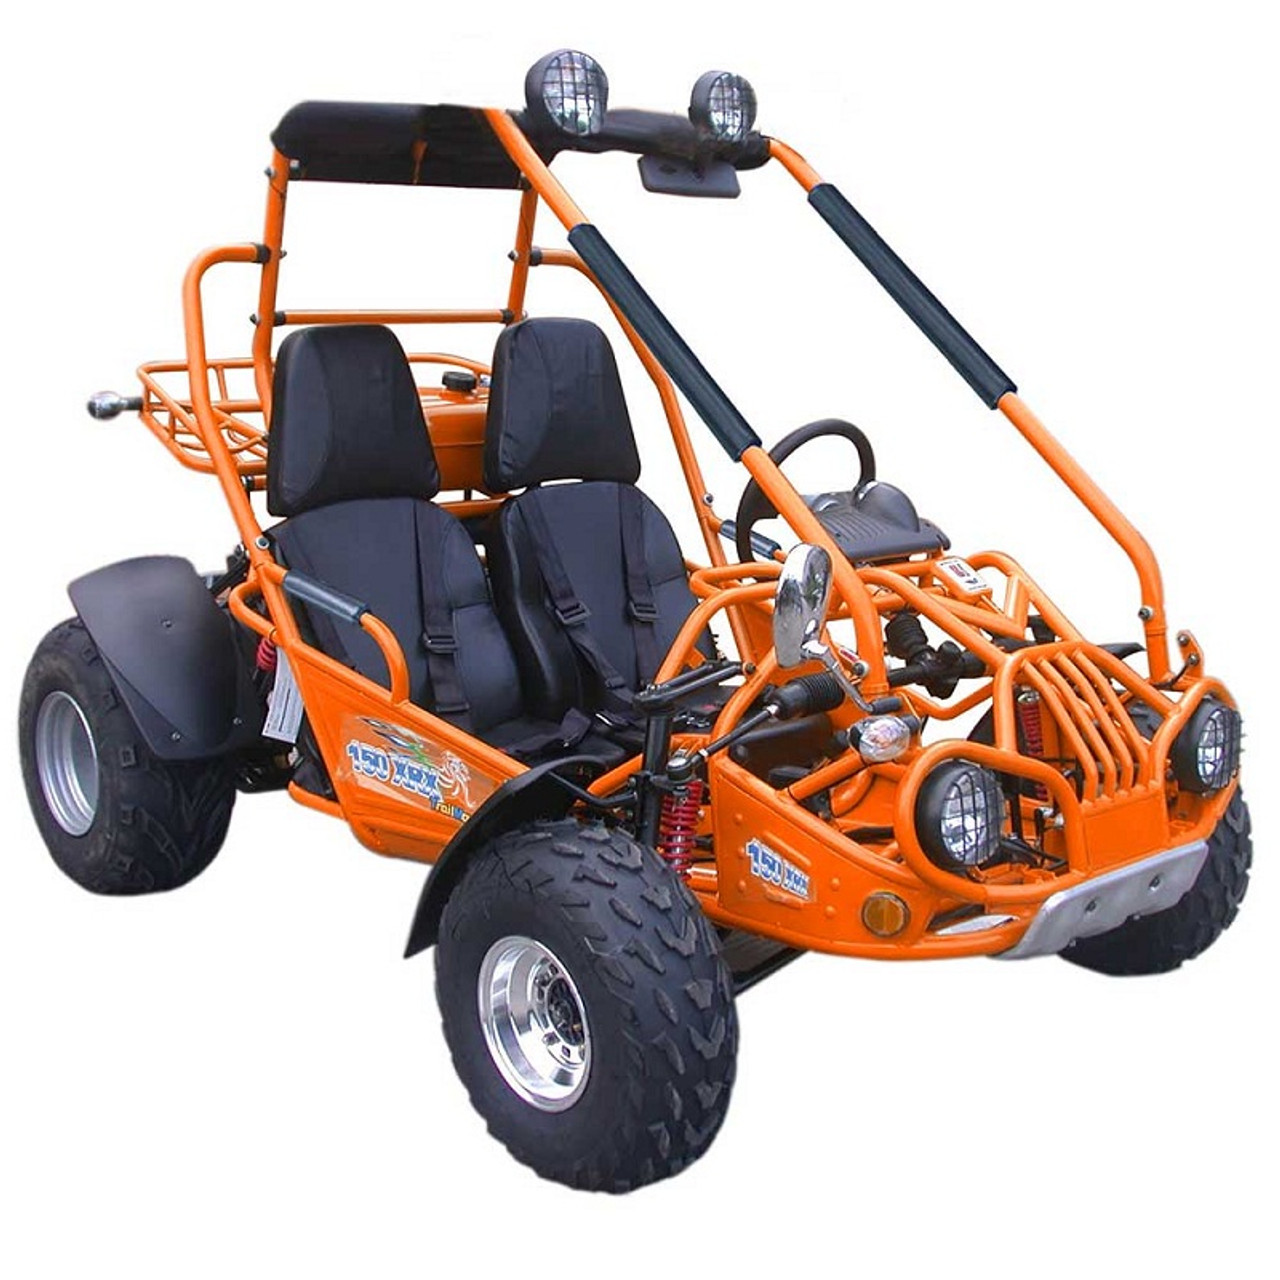 Trailmaster 200 XRX High Quality 200CC Electric Start 4-Stroke, Single Cylinder, Air Cooled Go Kart